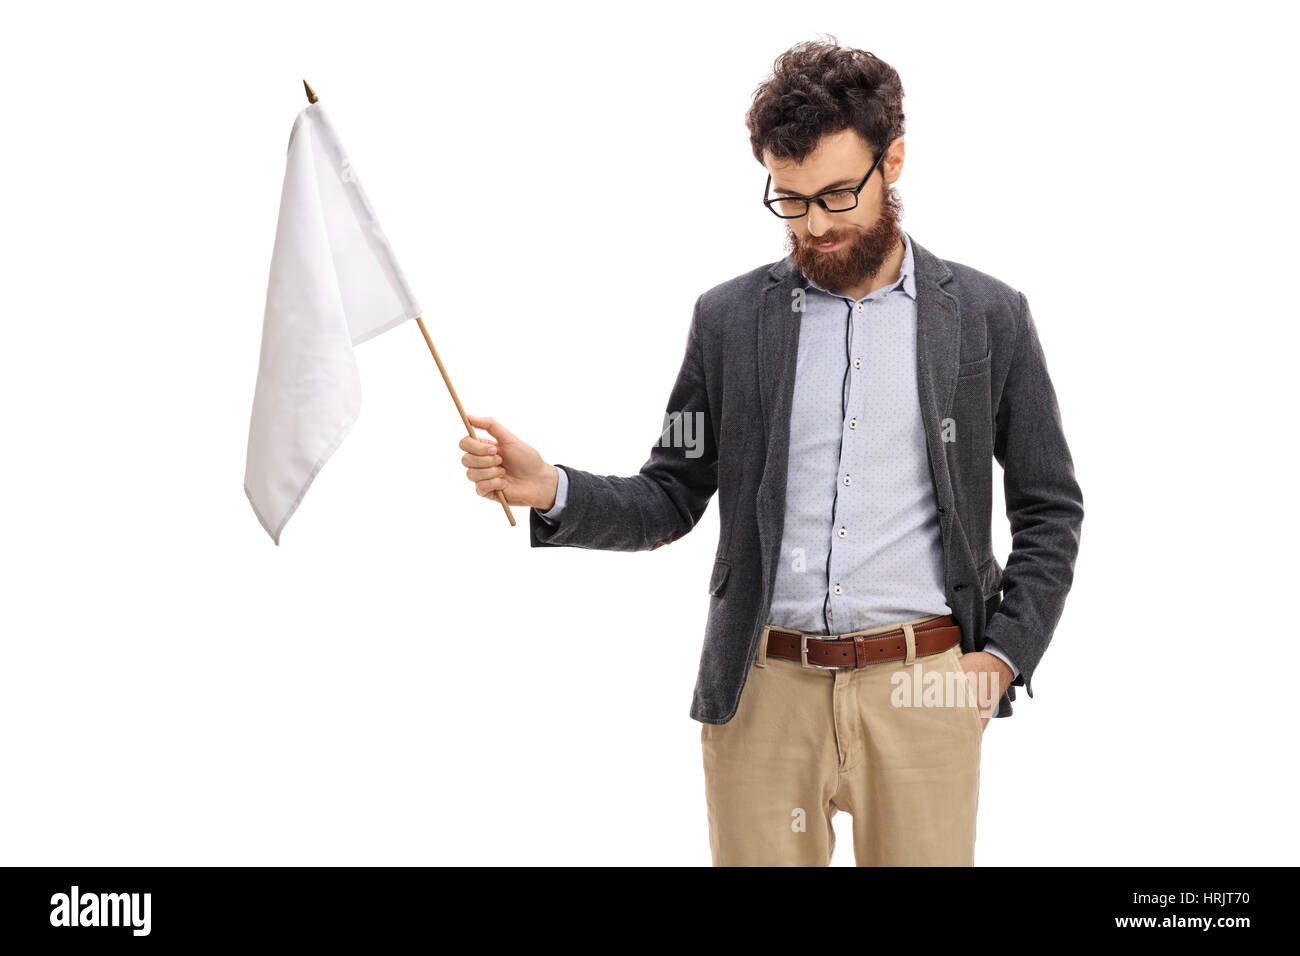 Man with his head down holding a white flag isolated on white background Stock Photo